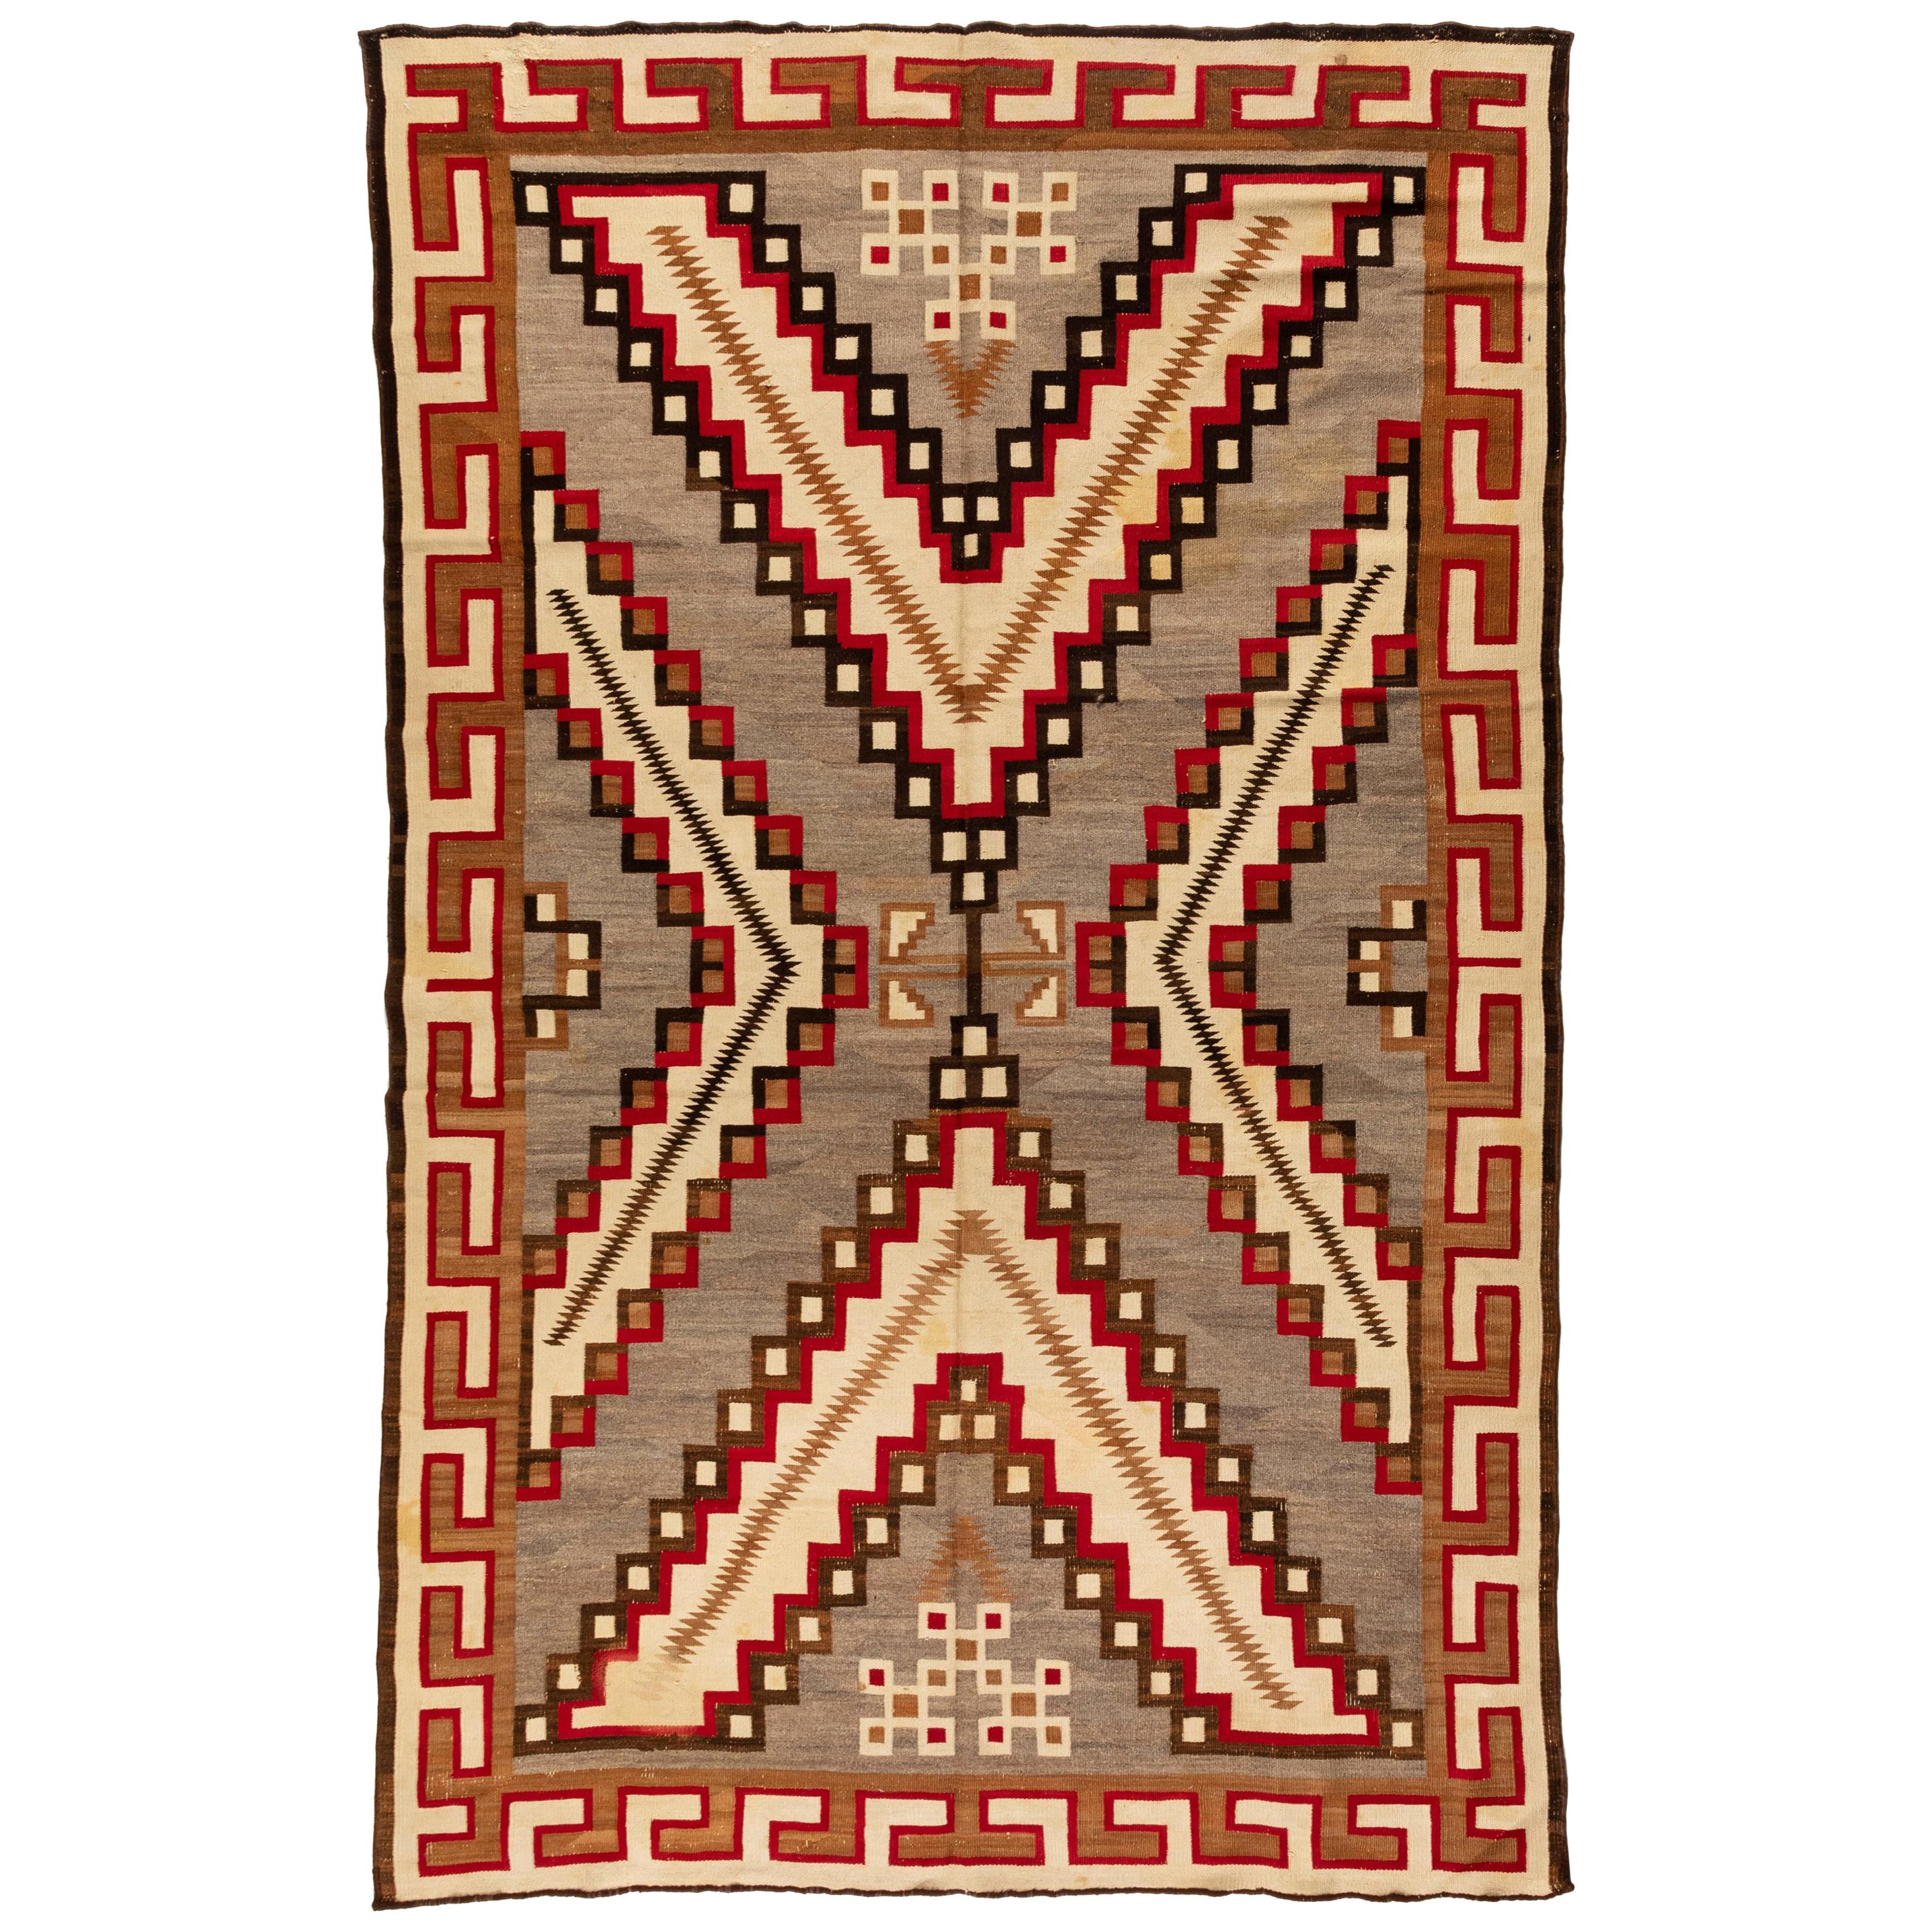 What do Navajo rugs represent?